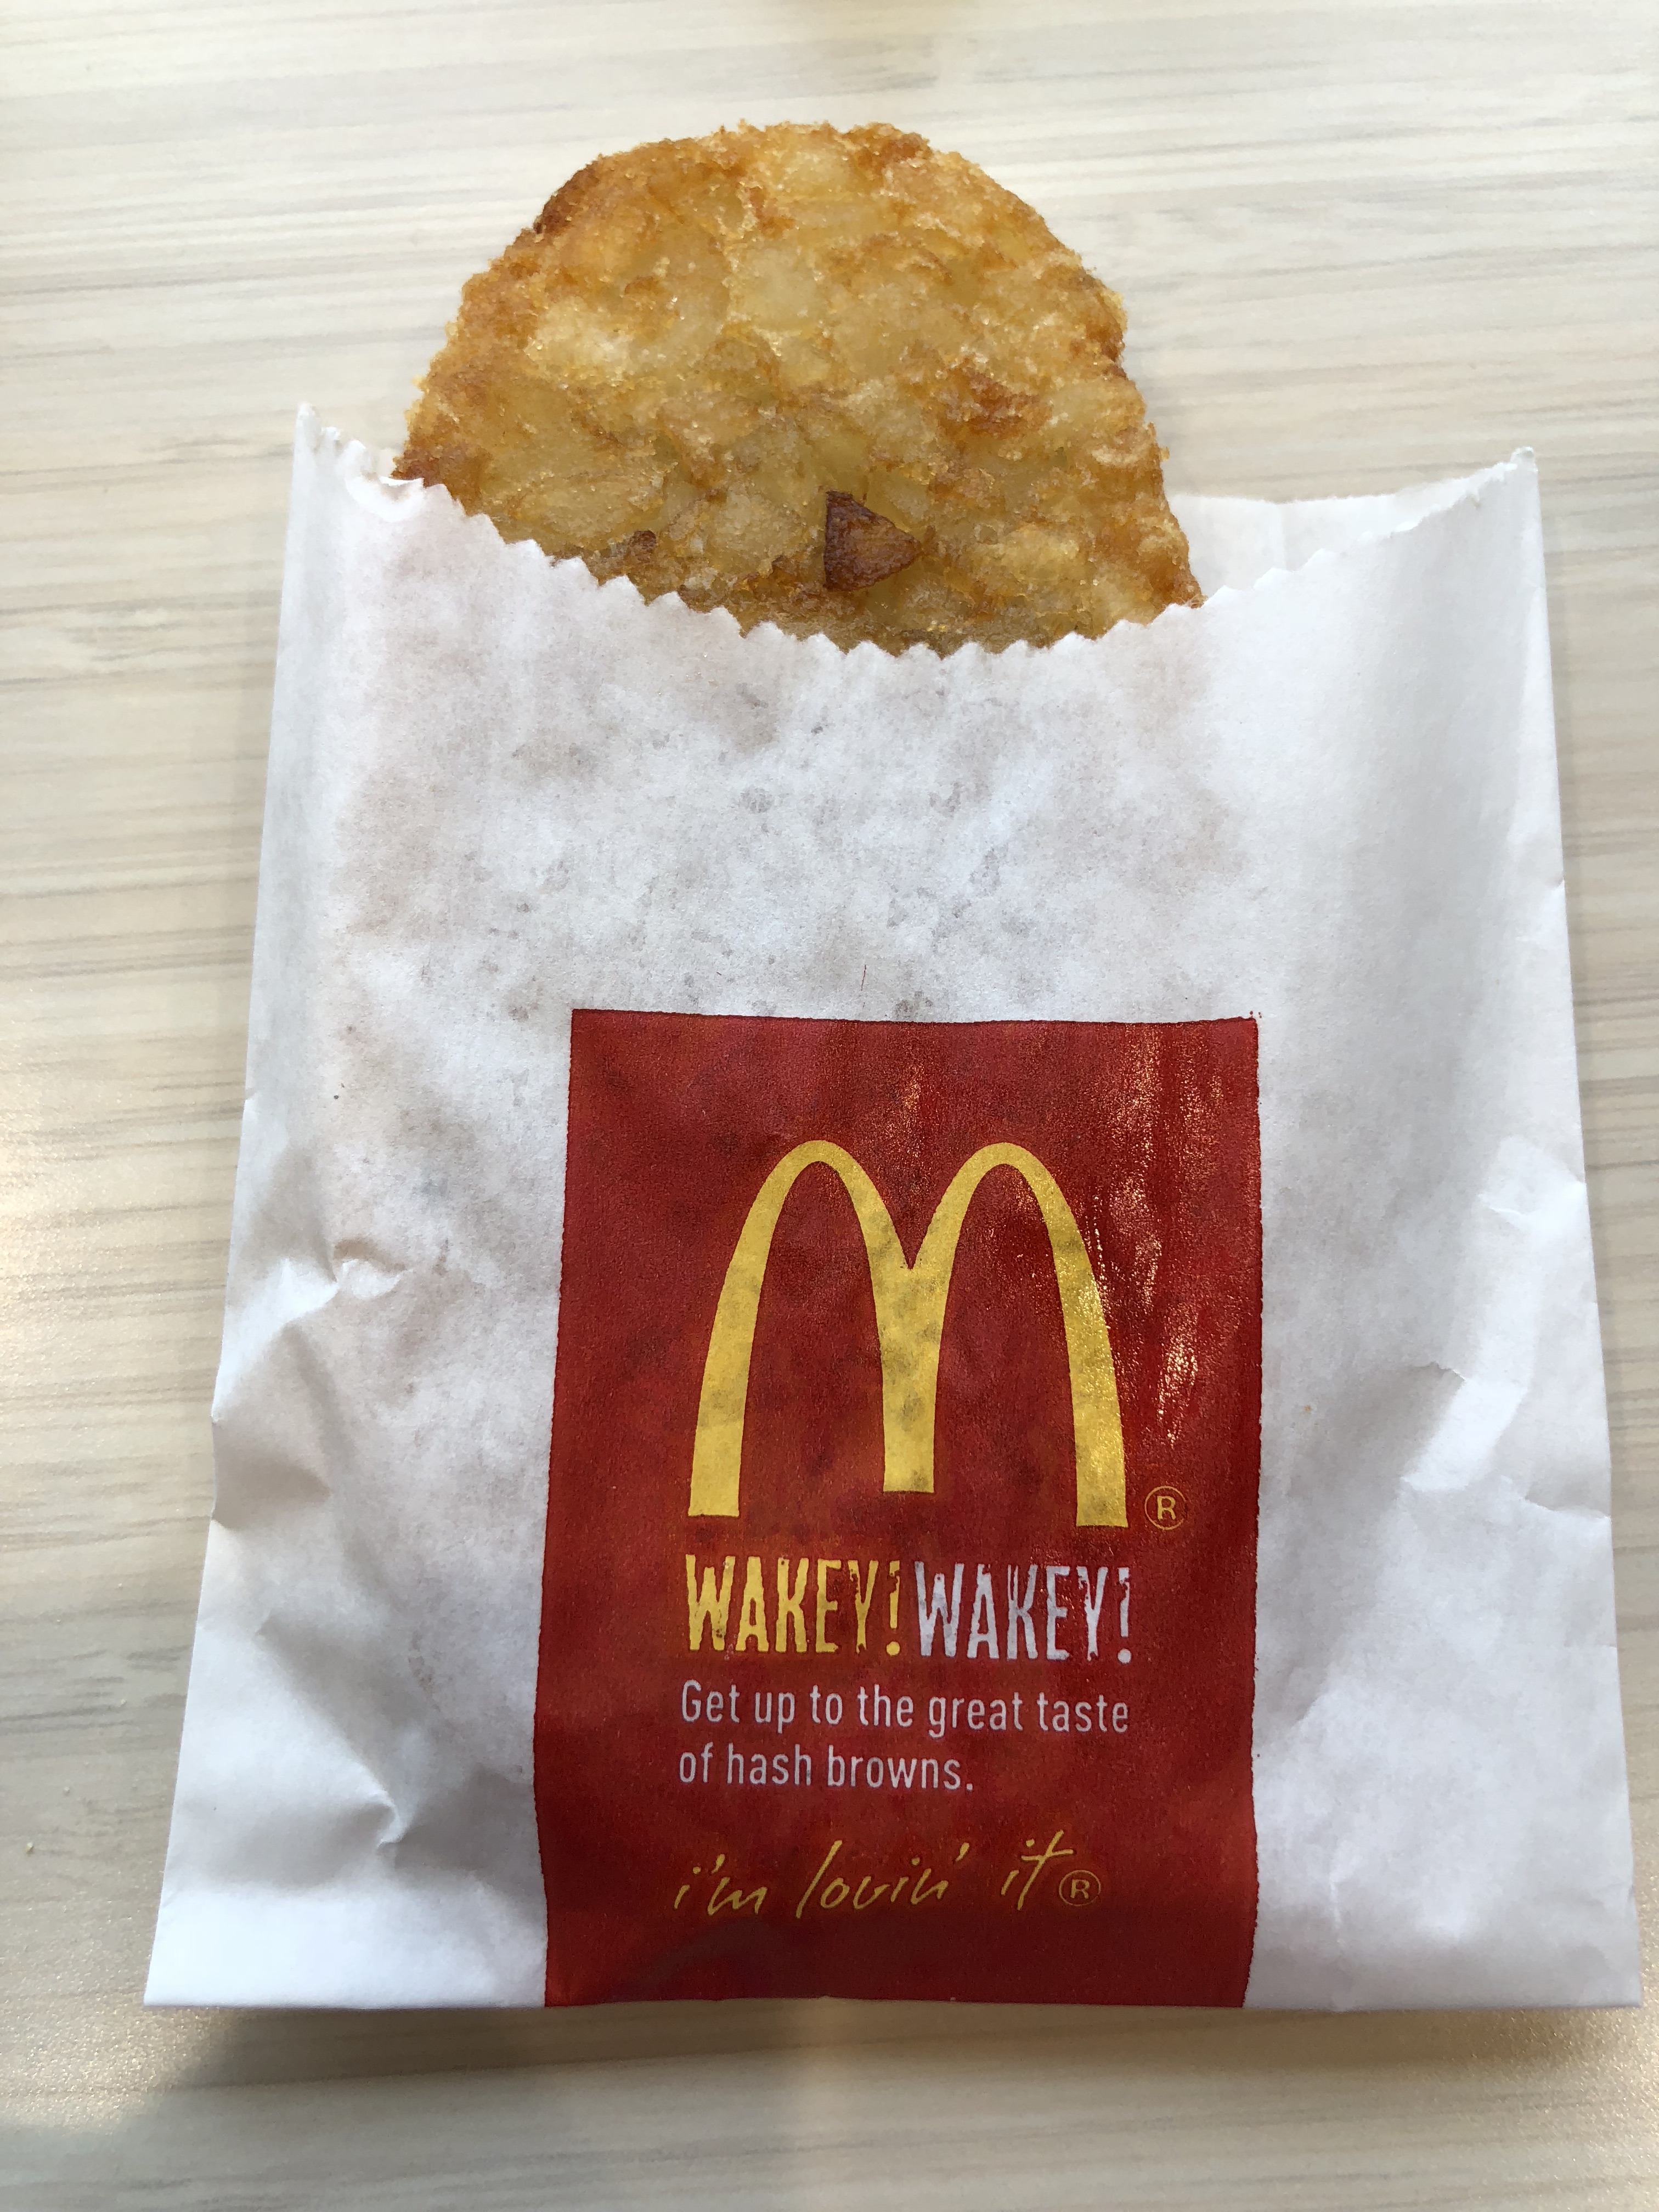 https://upload.wikimedia.org/wikipedia/commons/a/ac/2019-01-29_13_19_45_A_McDonald%27s_hash_brown_still_in_its_wrapper_in_Chantilly%2C_Fairfax_County%2C_Virginia.jpg